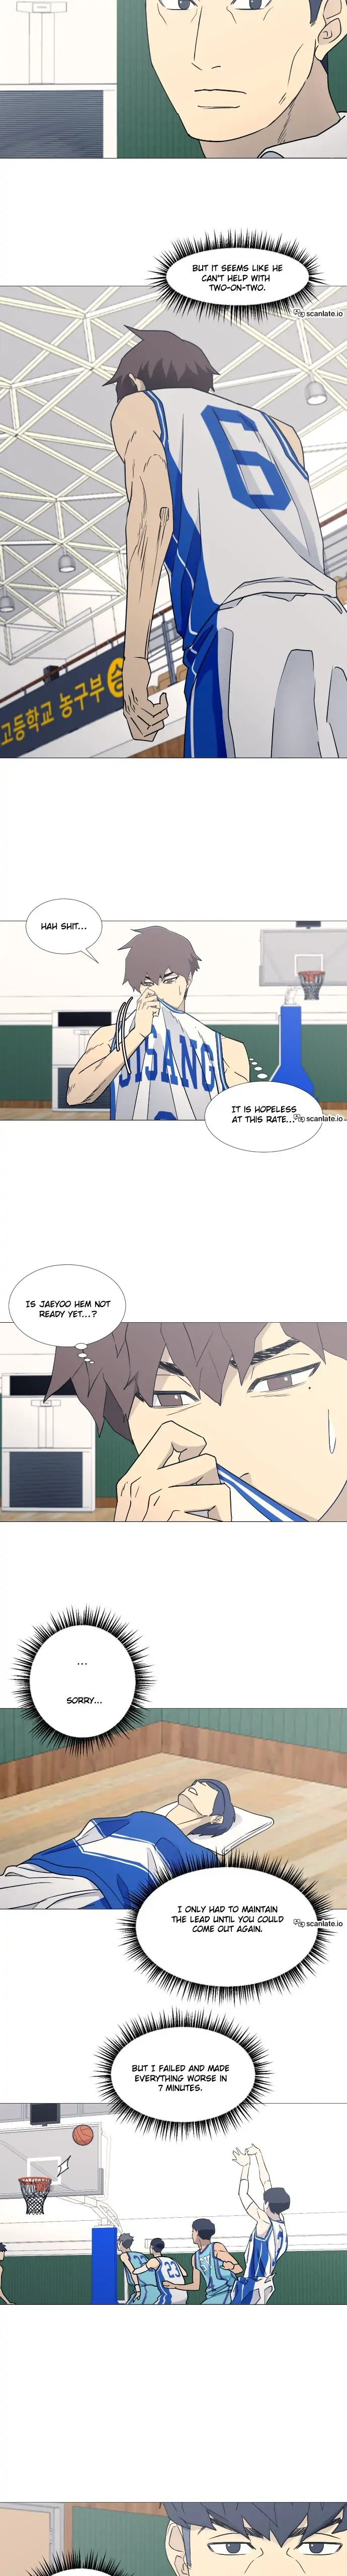 Garbage Time – Basketball Underdogs Chapter 63 - Page 4